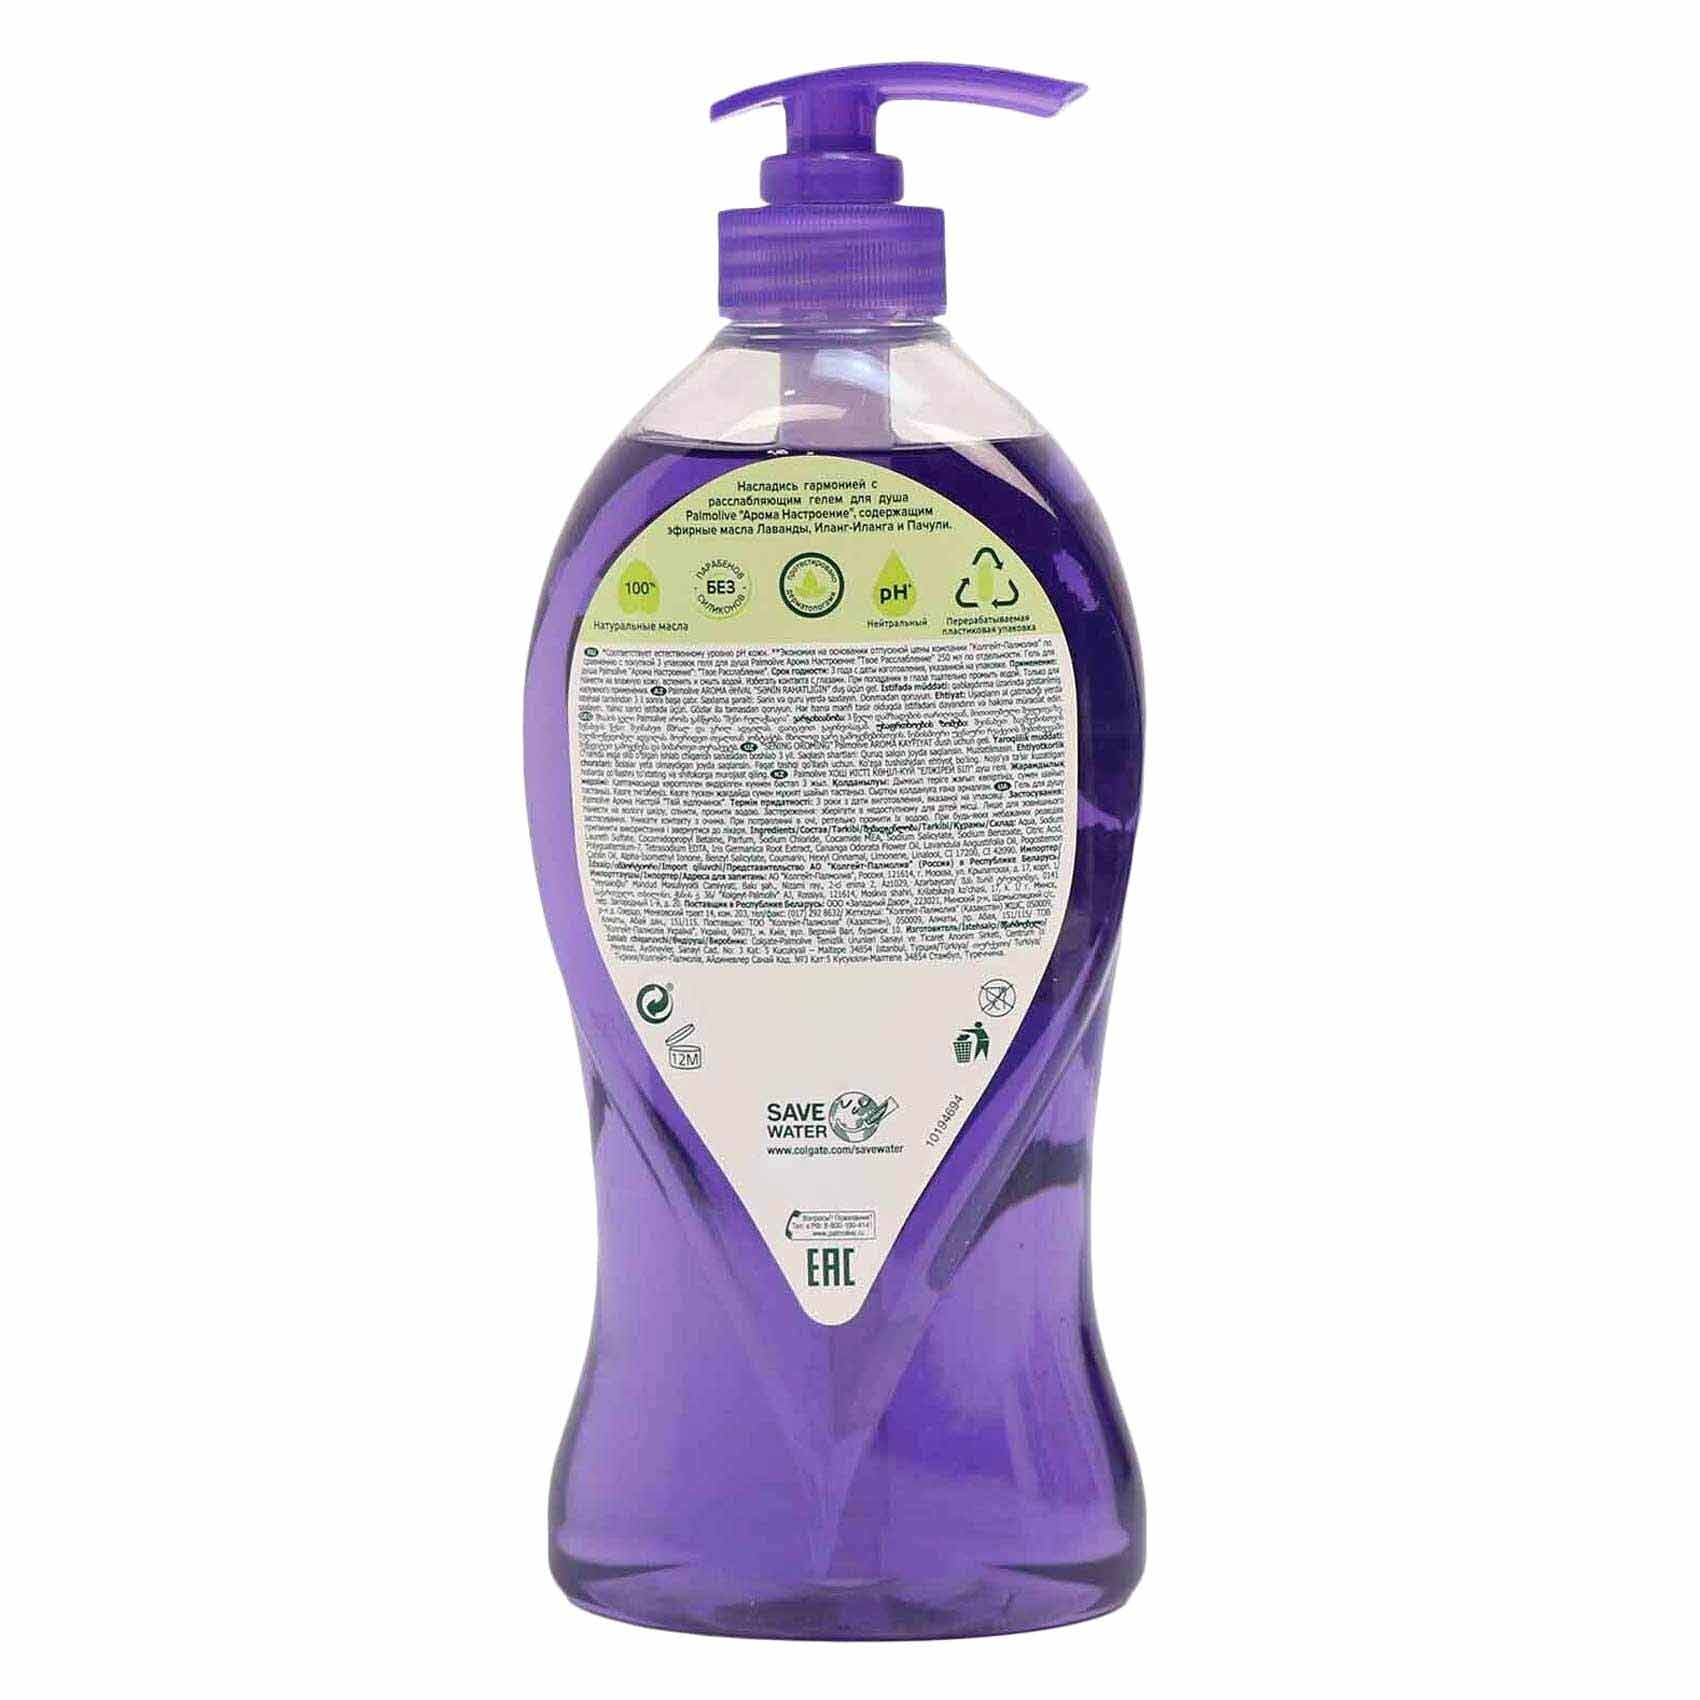 Palmolive So Relaxed Lavender Shower Gel 750ml